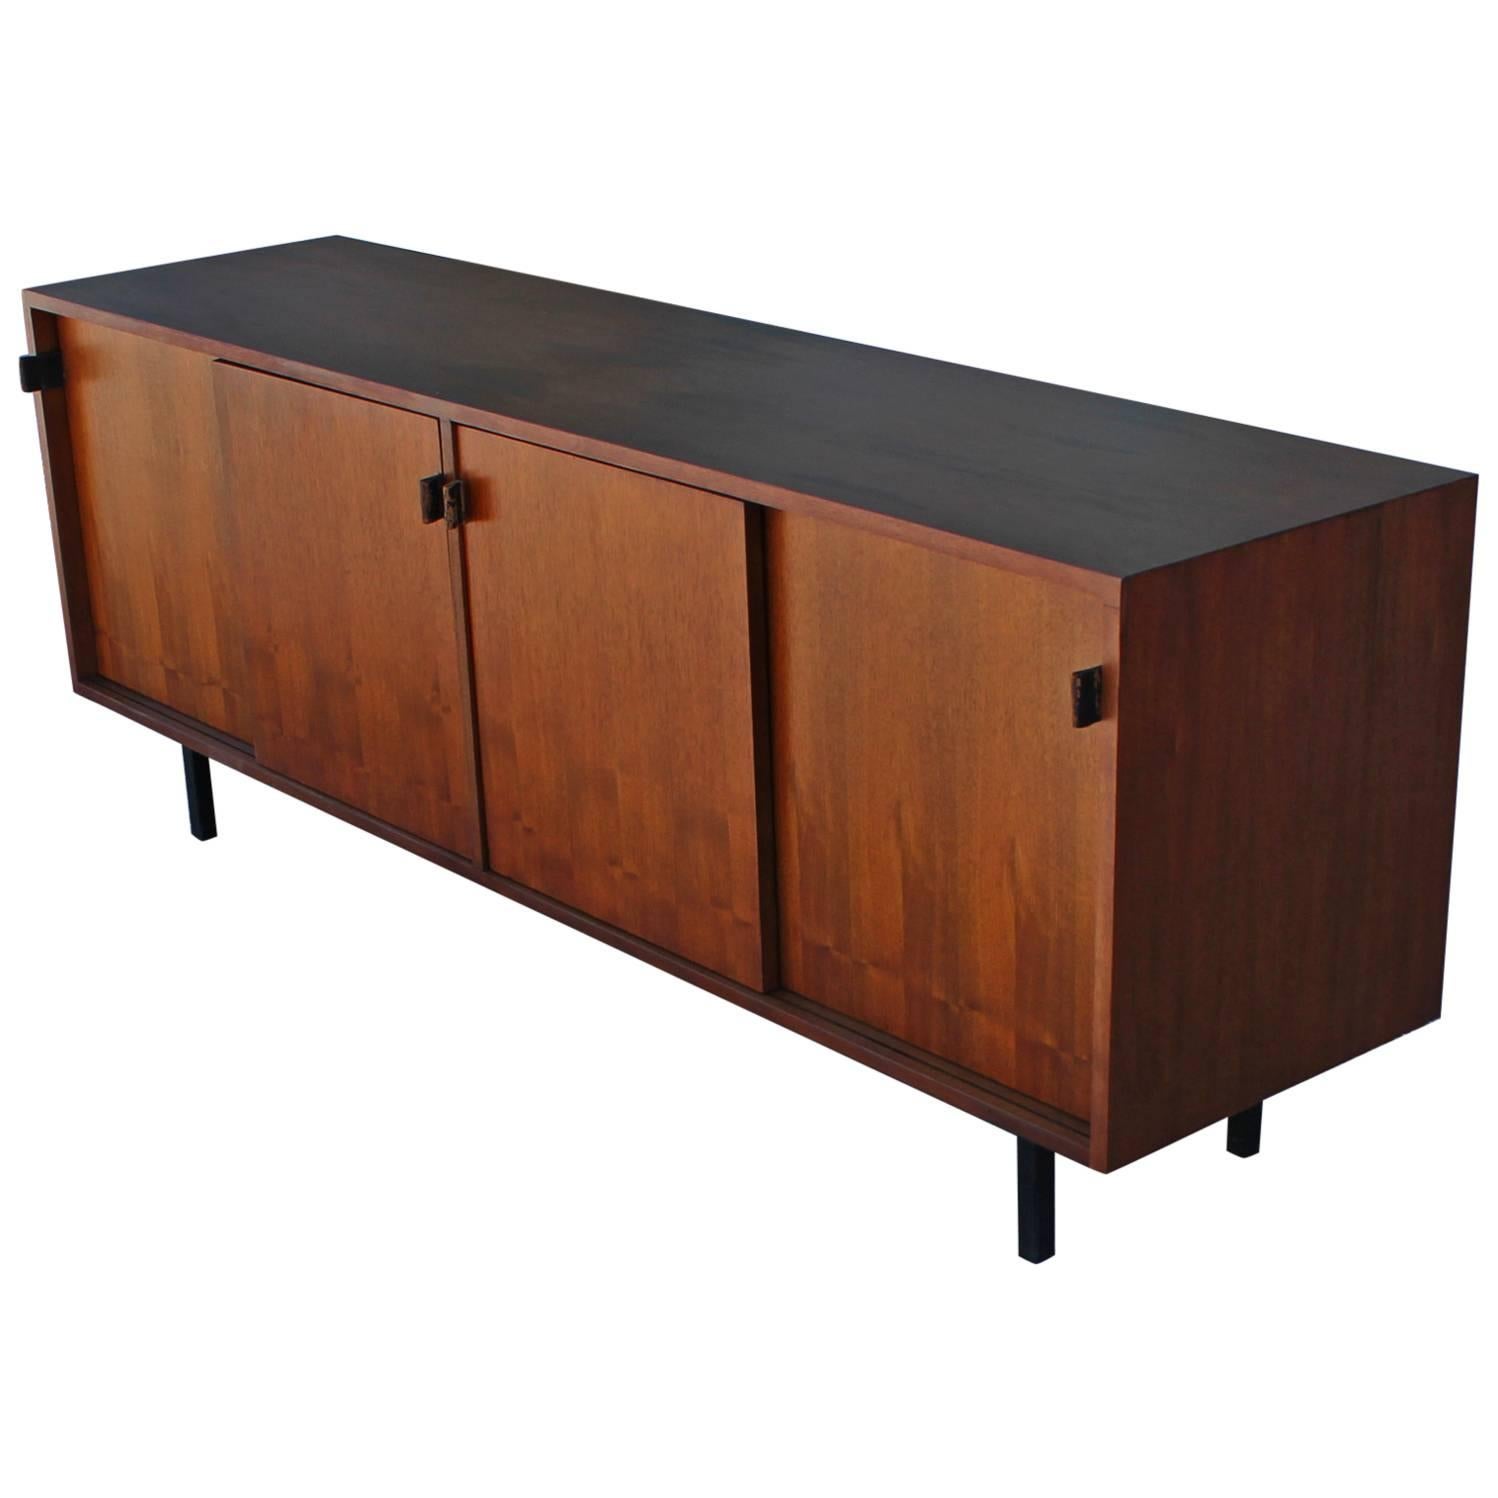 Early Walnut Modern Knoll Sliding Door Sideboard with Vintage Leather Pulls